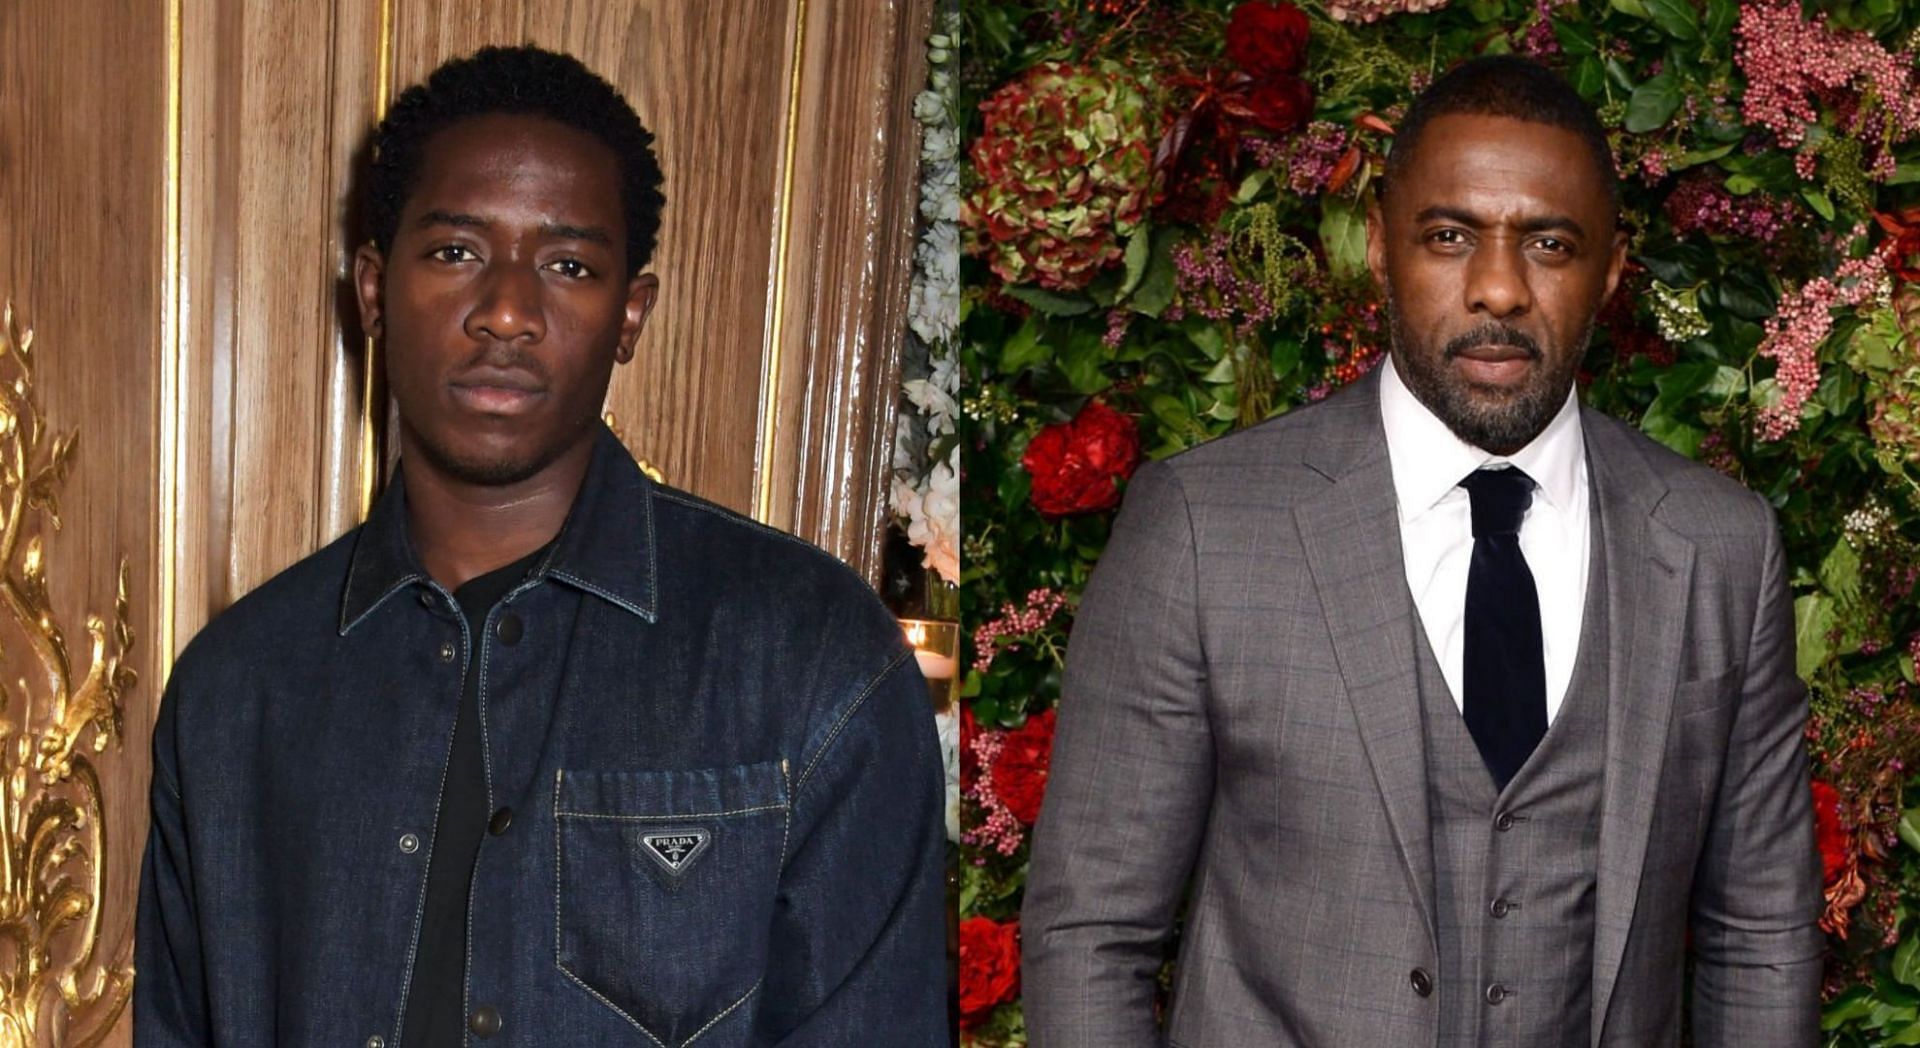 Damson Idris is not related to Idris Elba despite sharing their last and first names (Image via Getty Images)